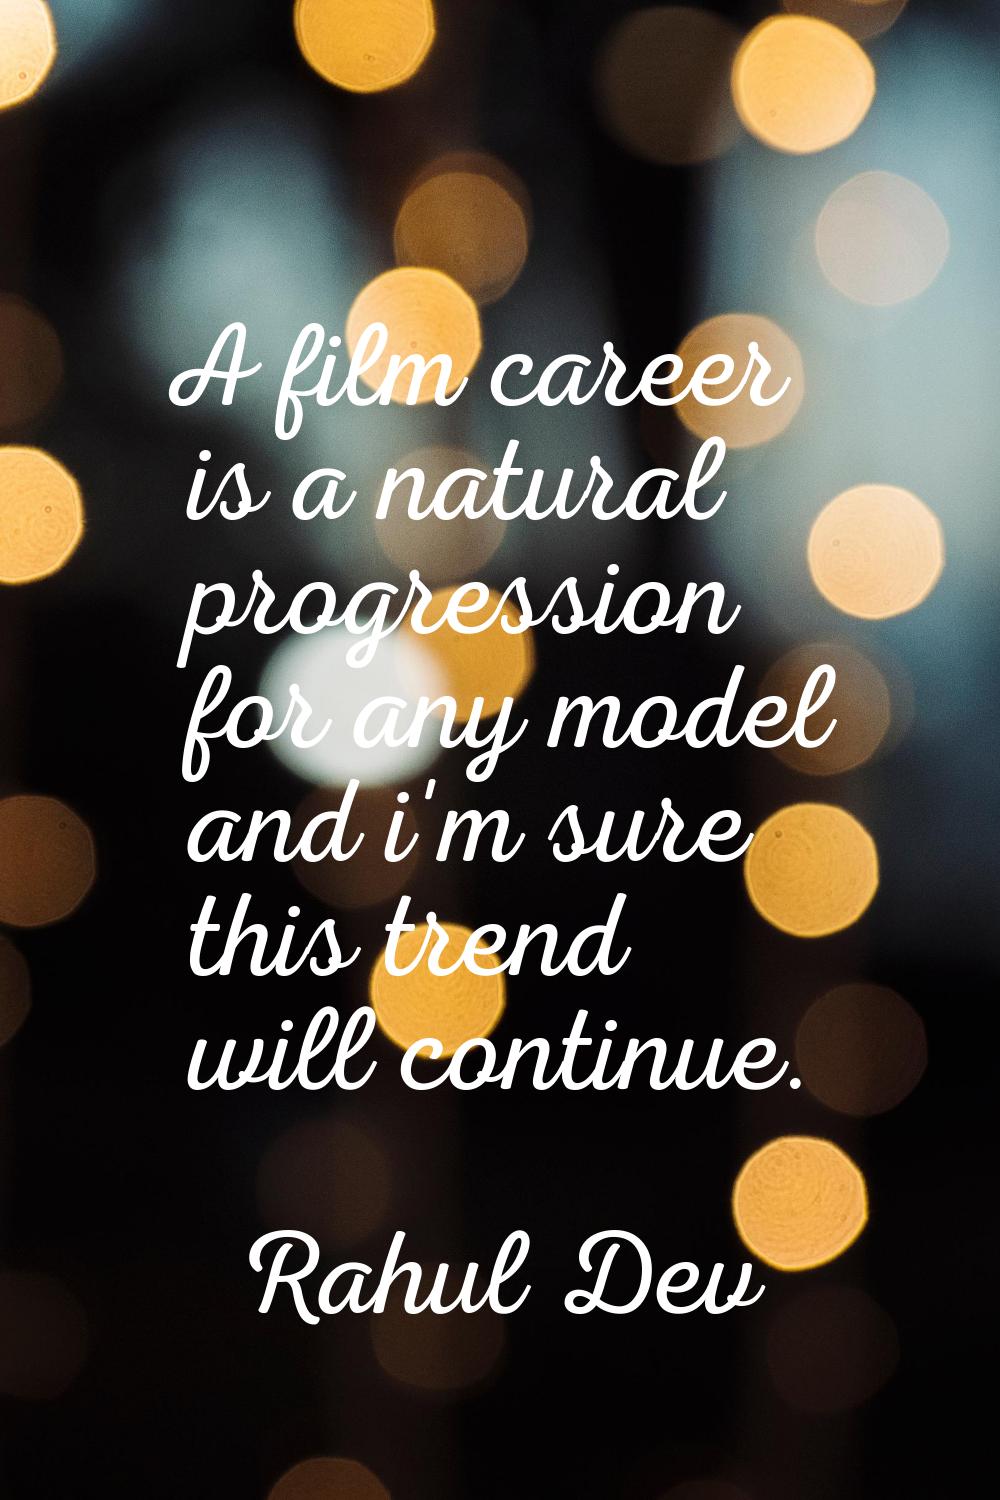 A film career is a natural progression for any model and i'm sure this trend will continue.